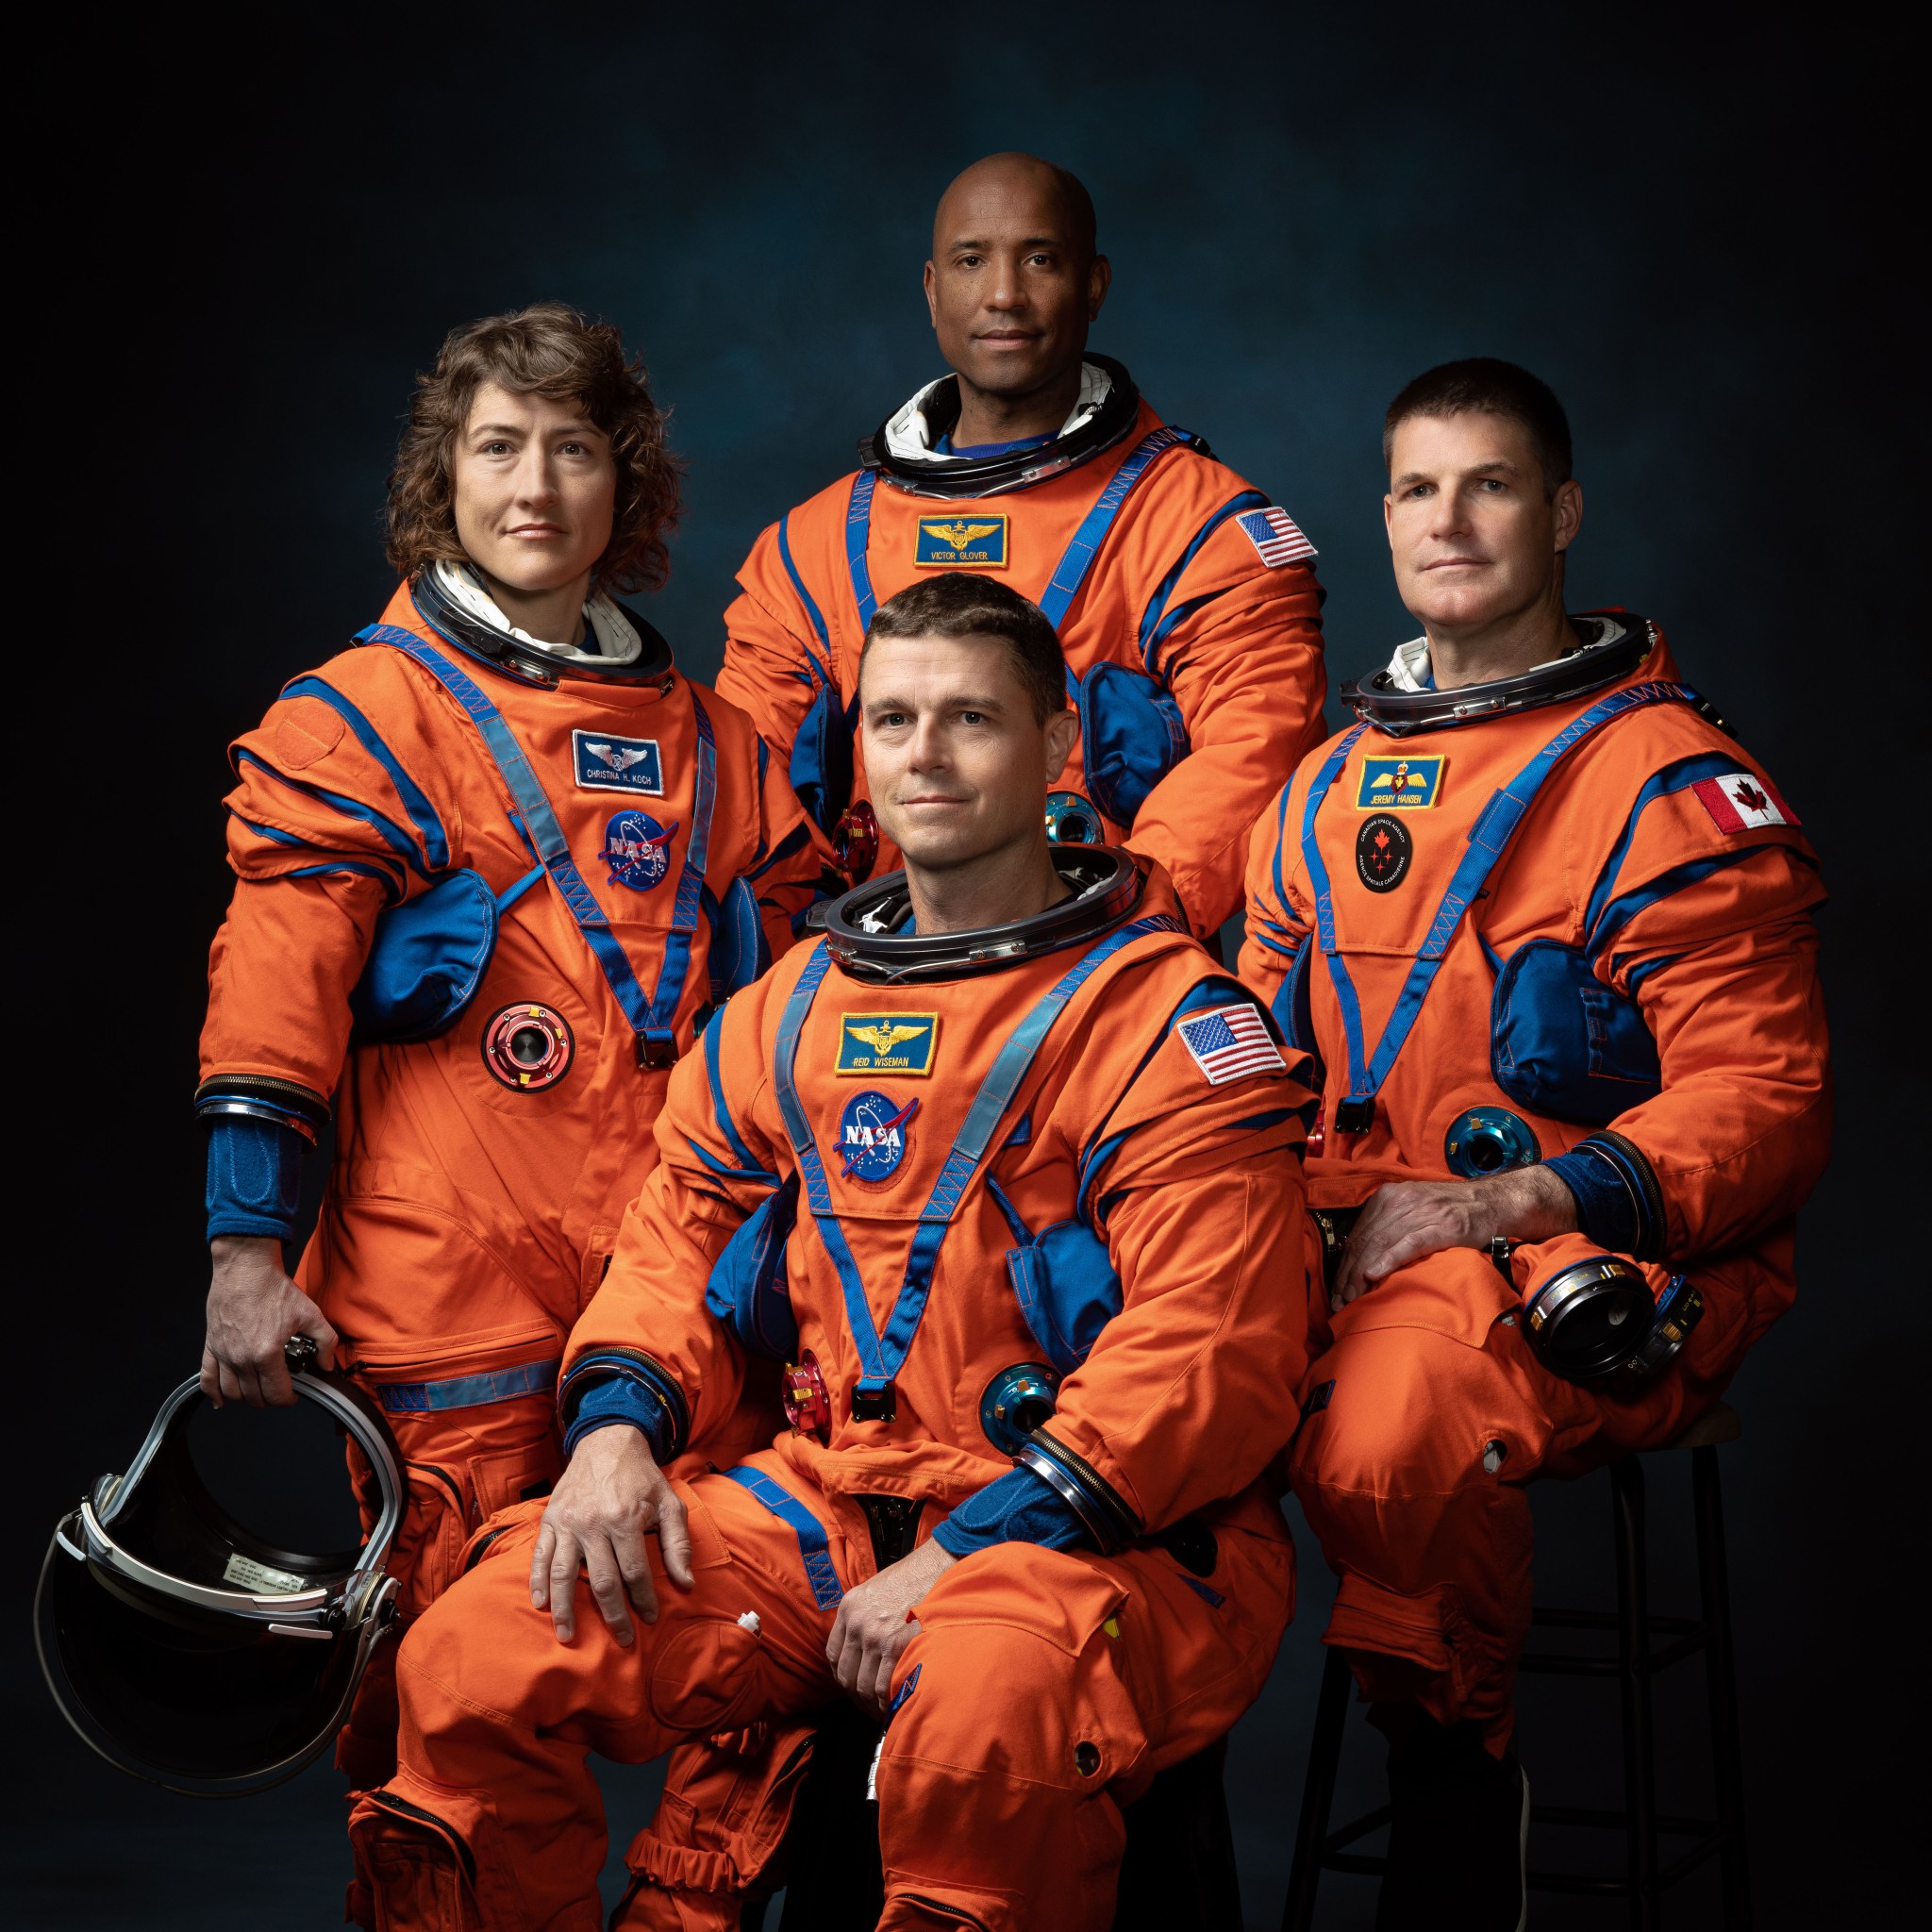 The crew of NASA’s Artemis II mission (left to right): Christina Hammock Koch, Reid Wiseman (seated), Victor Glover, and Jeremy Hansen.